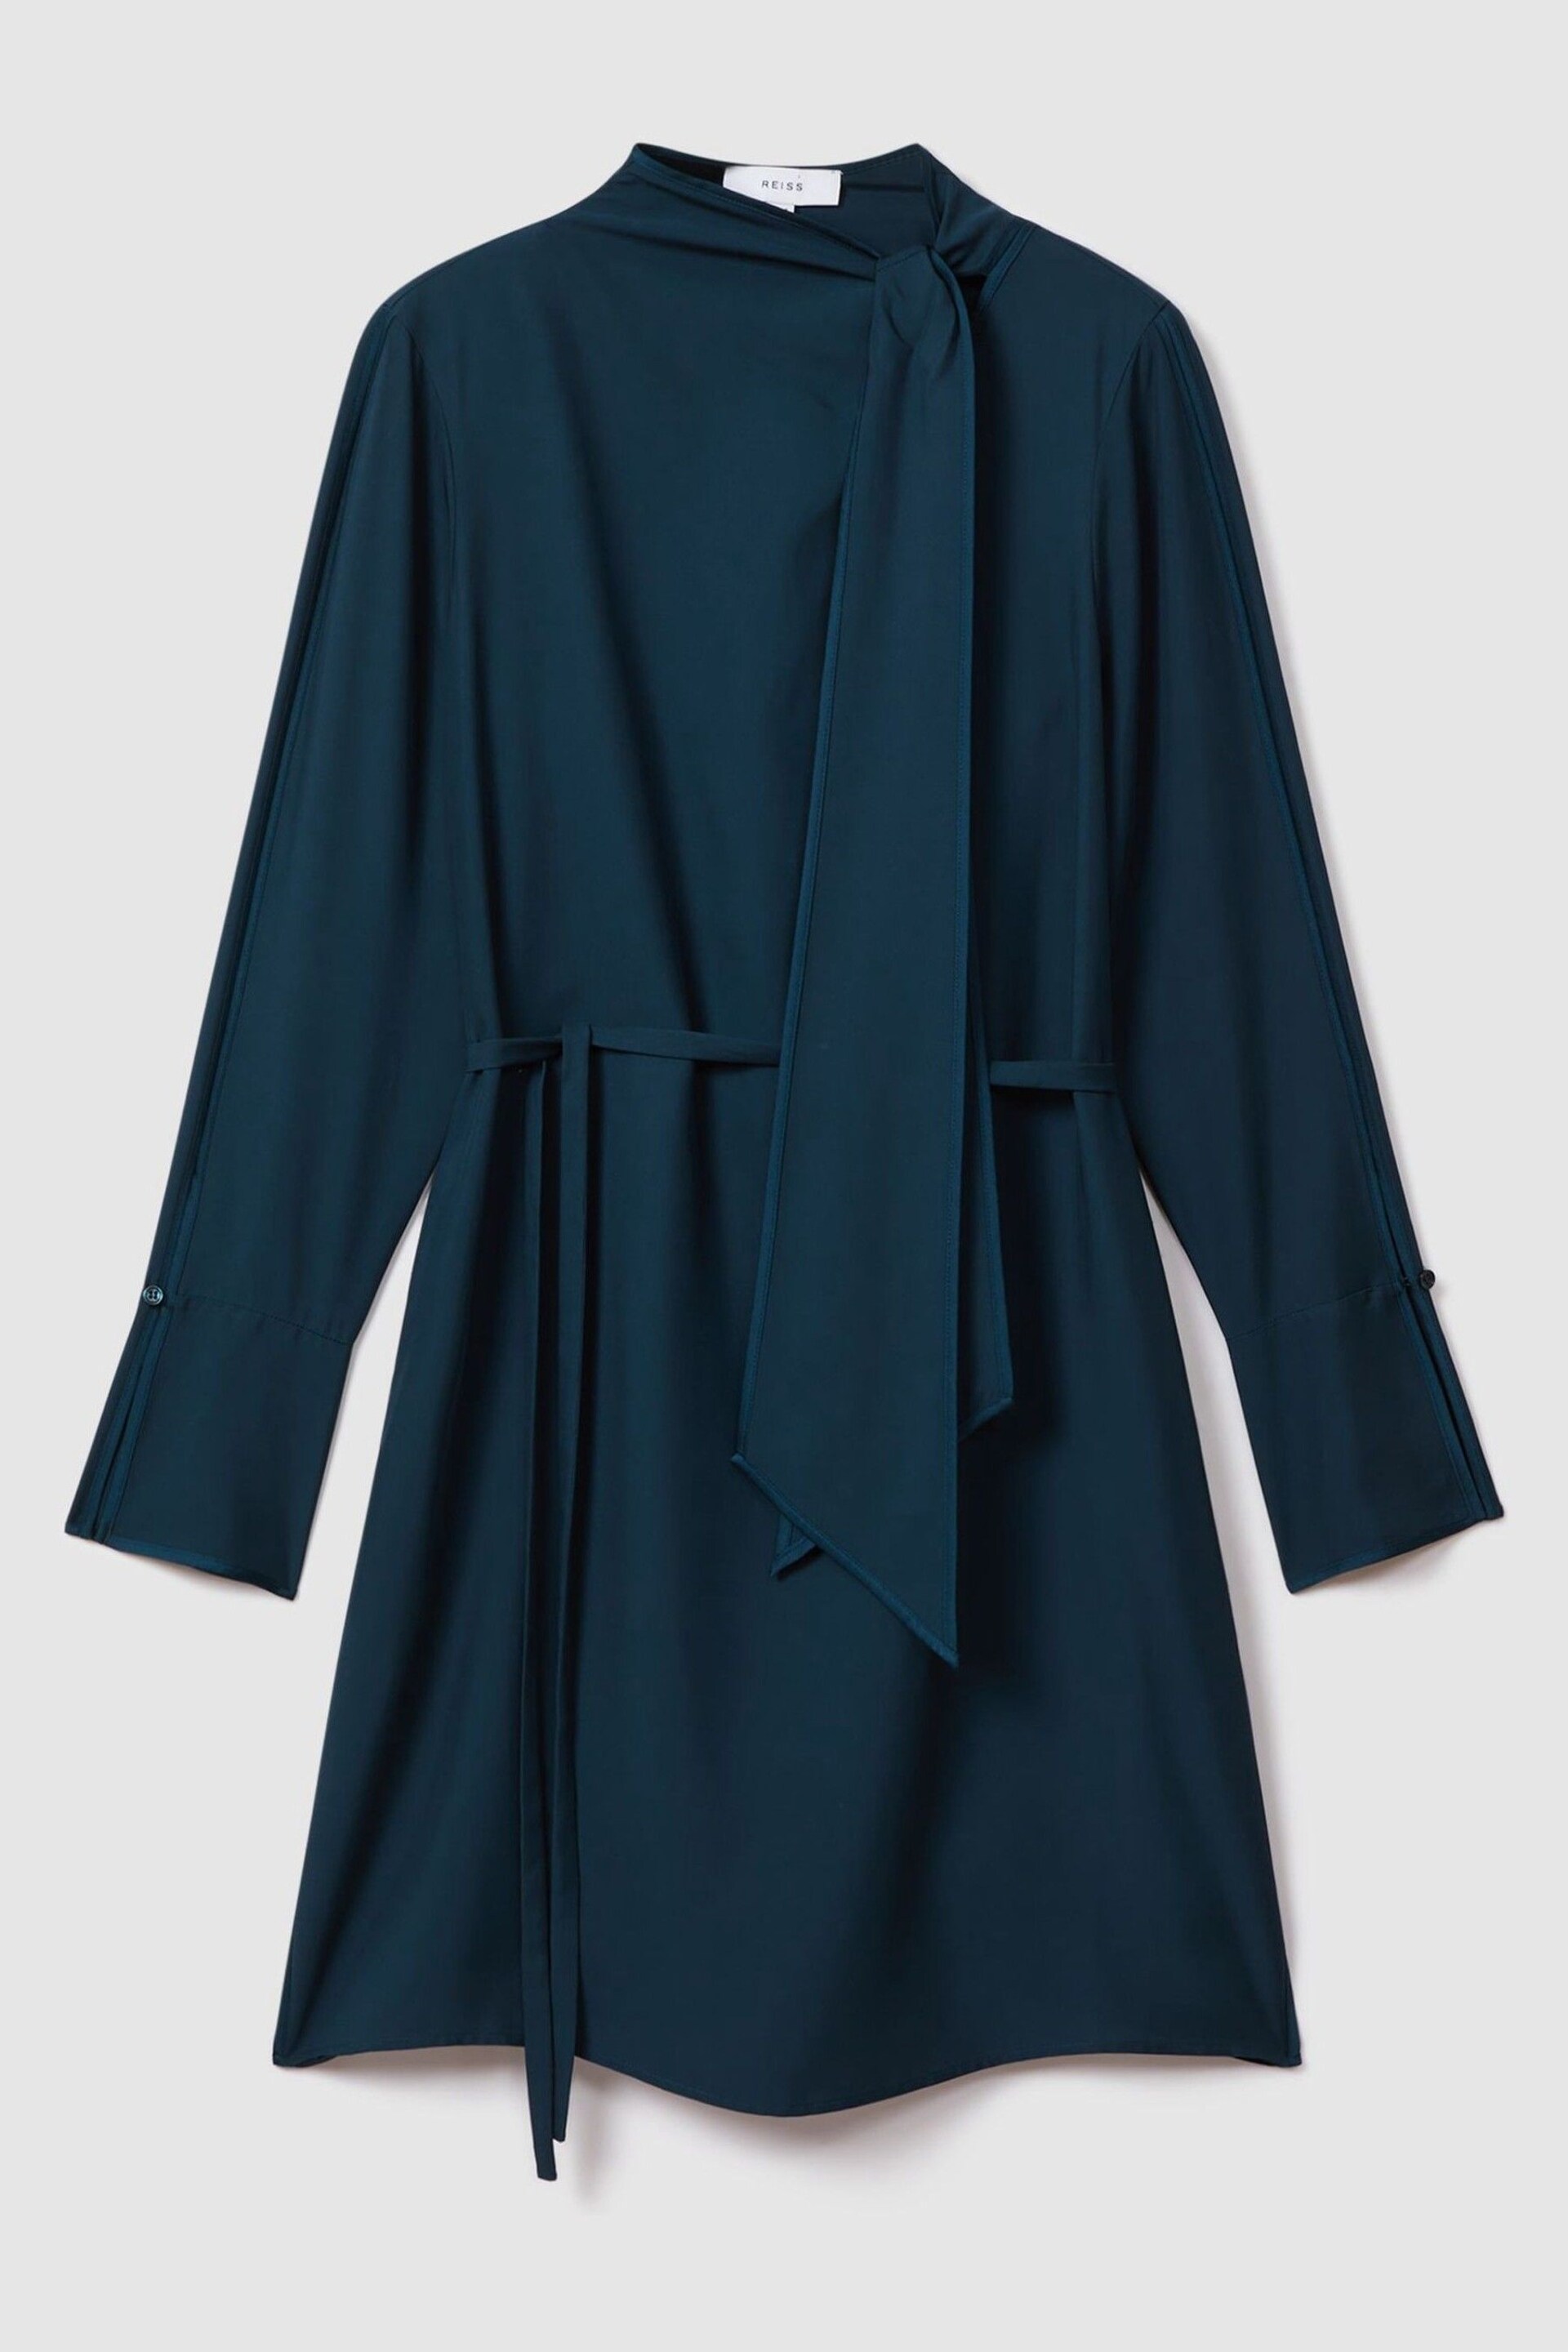 Reiss Teal Avery Tie Neck Belted Mini Dress - Image 2 of 7